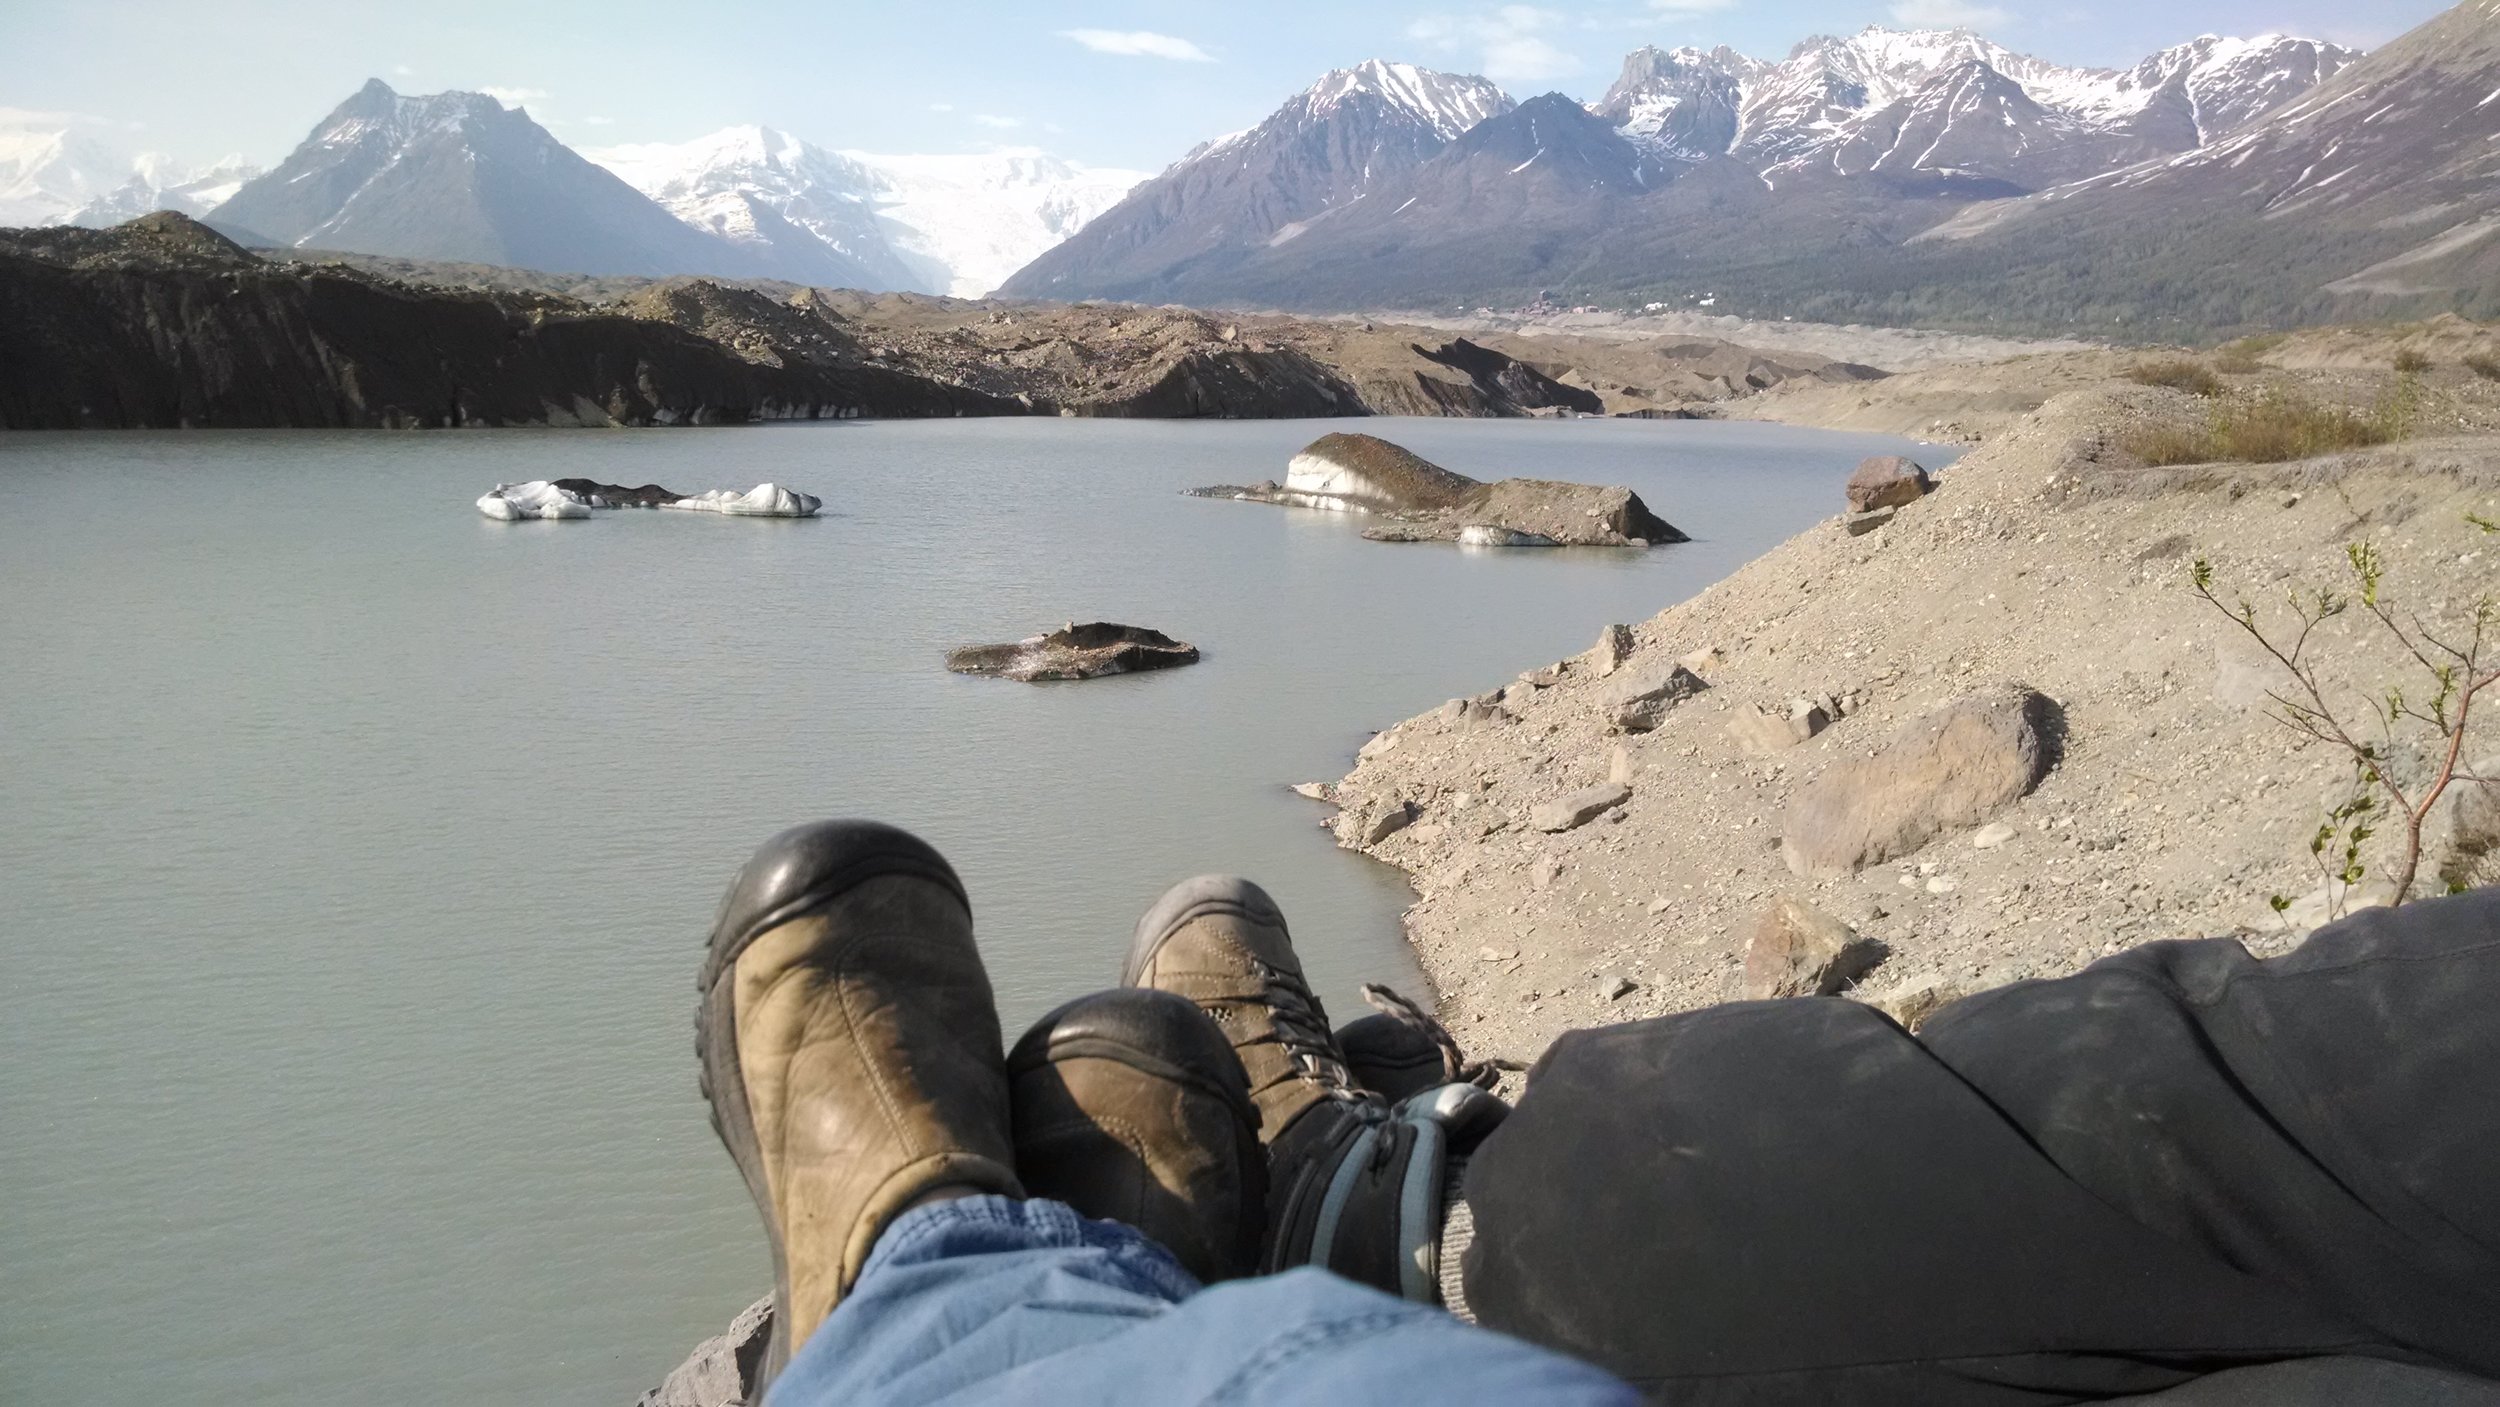  Relaxing at the Toe of the Kennicott Glacier 